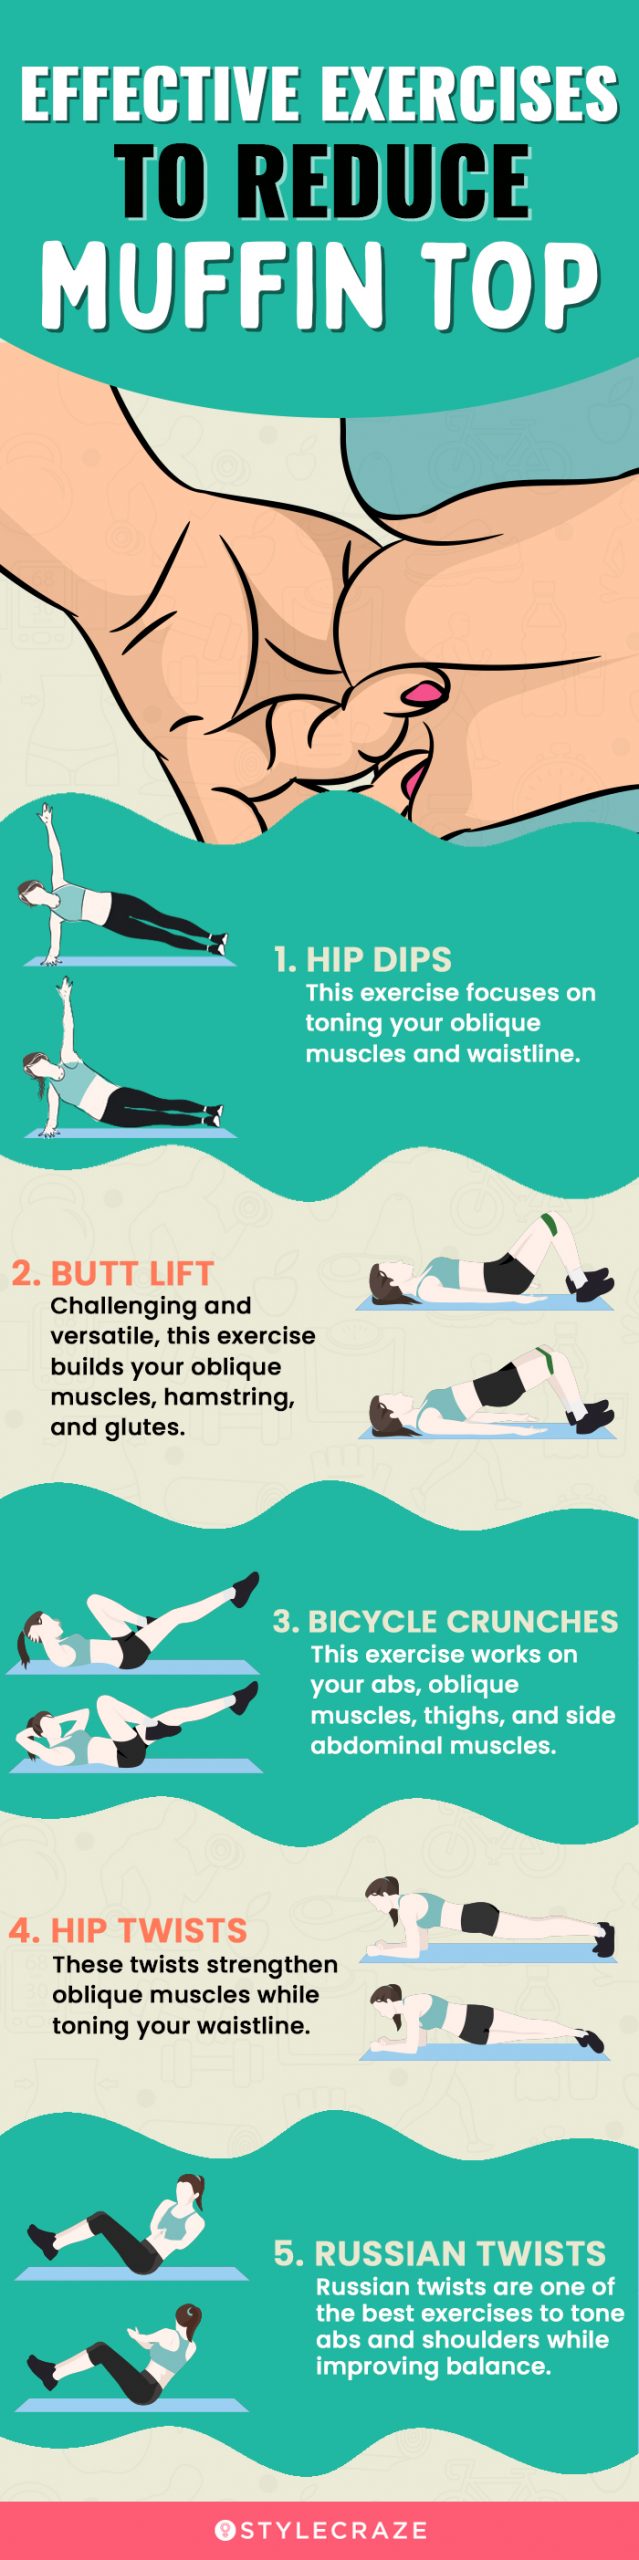 effective exercises to reduce muffin top [infographic]